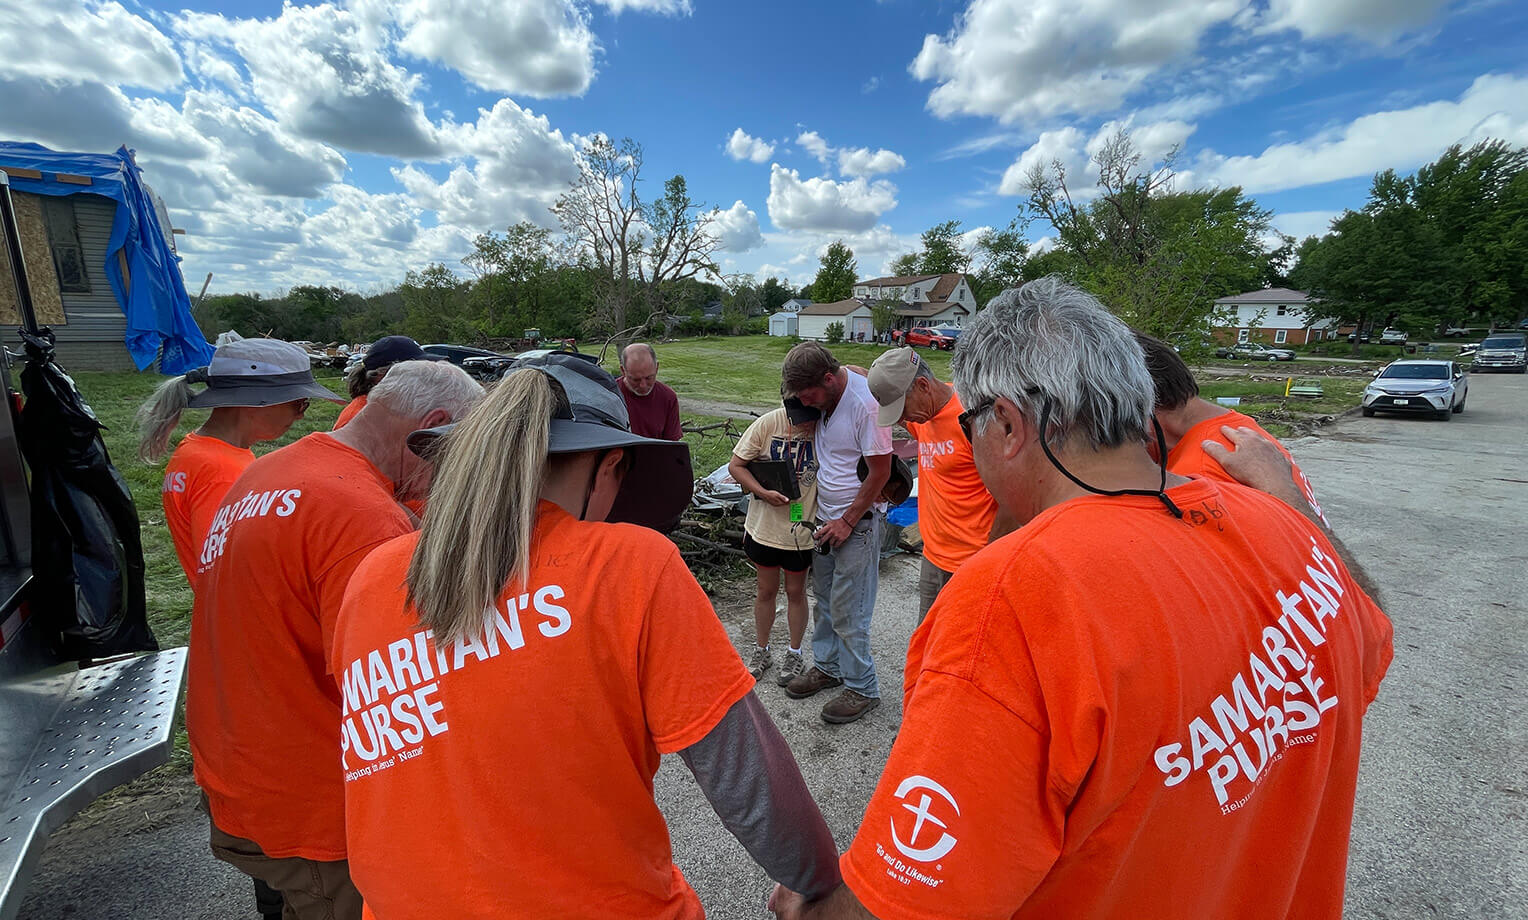 Volunteers pray with Greenfield residents T.J. Oden and Ashley during our work following an EF-4 tornado.